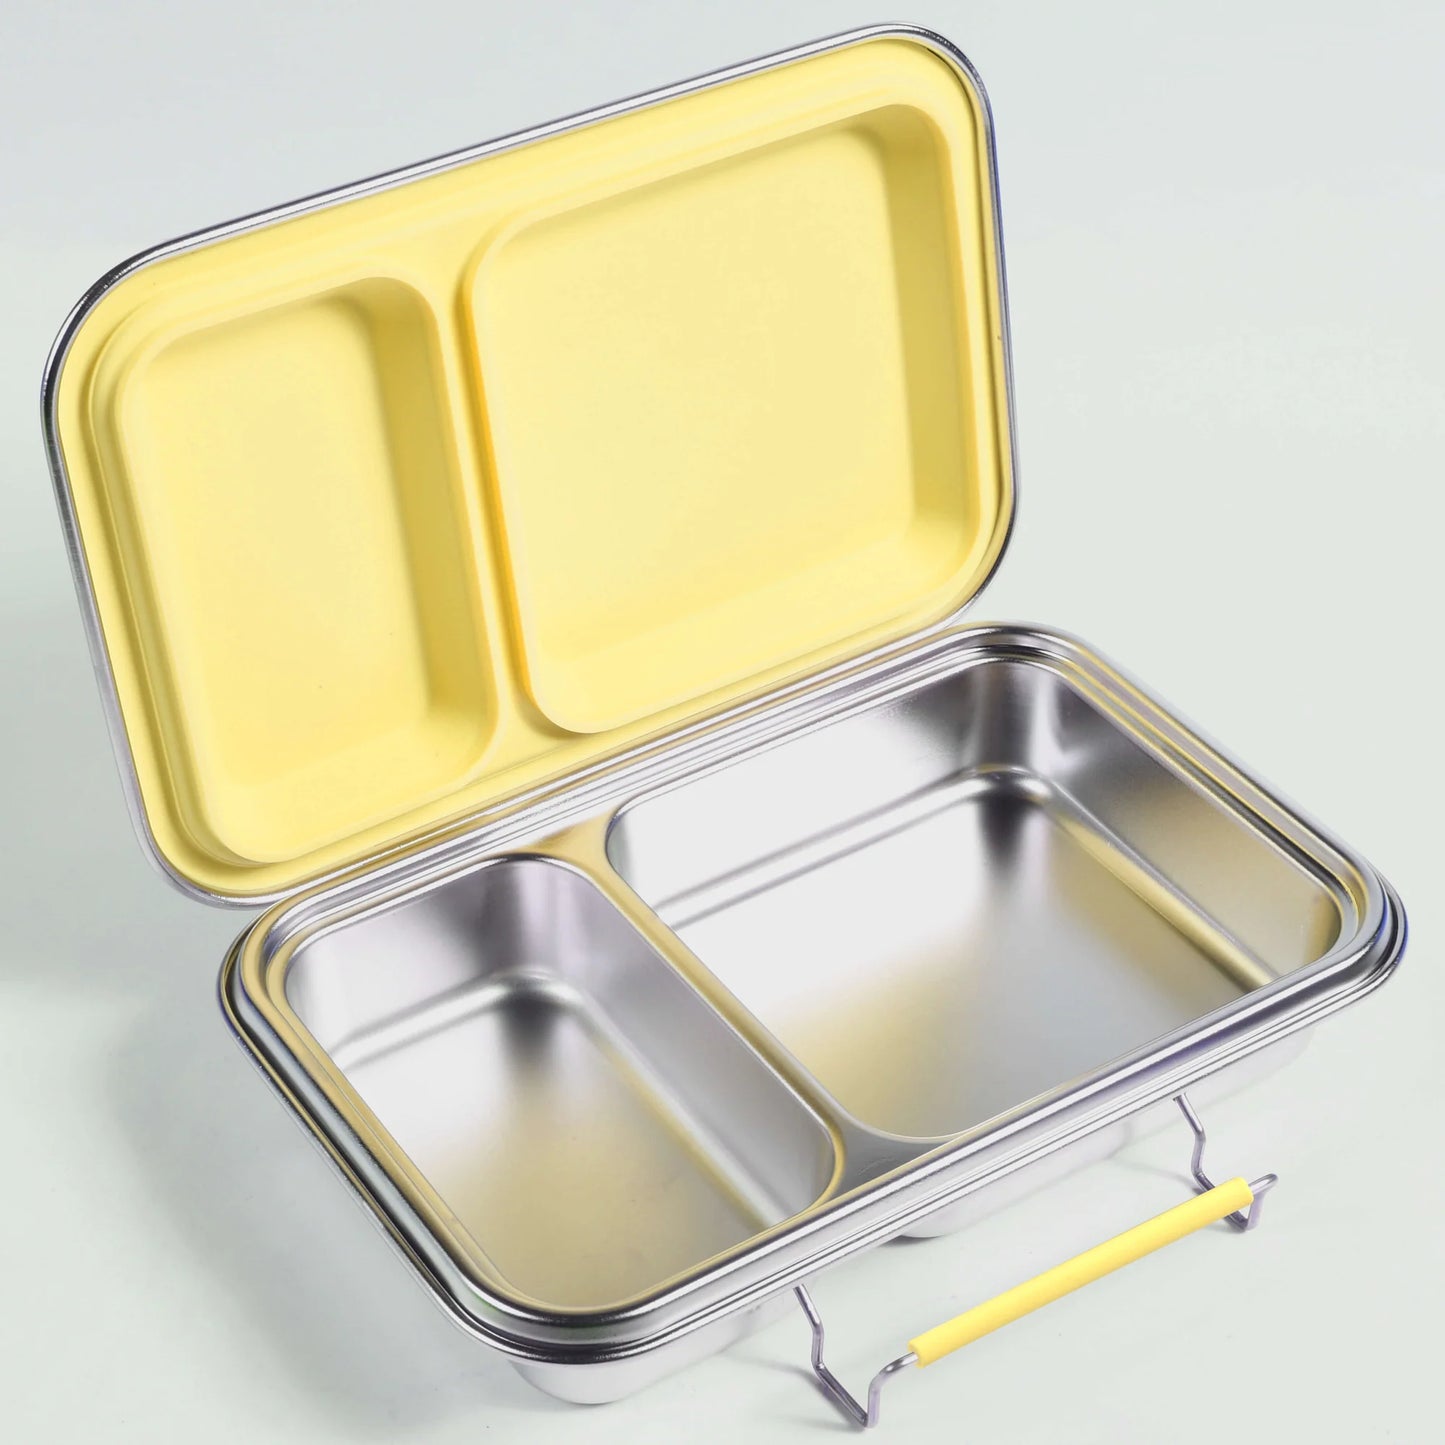 Ecococoon Stainless Steel Leakproof Bento Box - 2 compartment - Limoncello